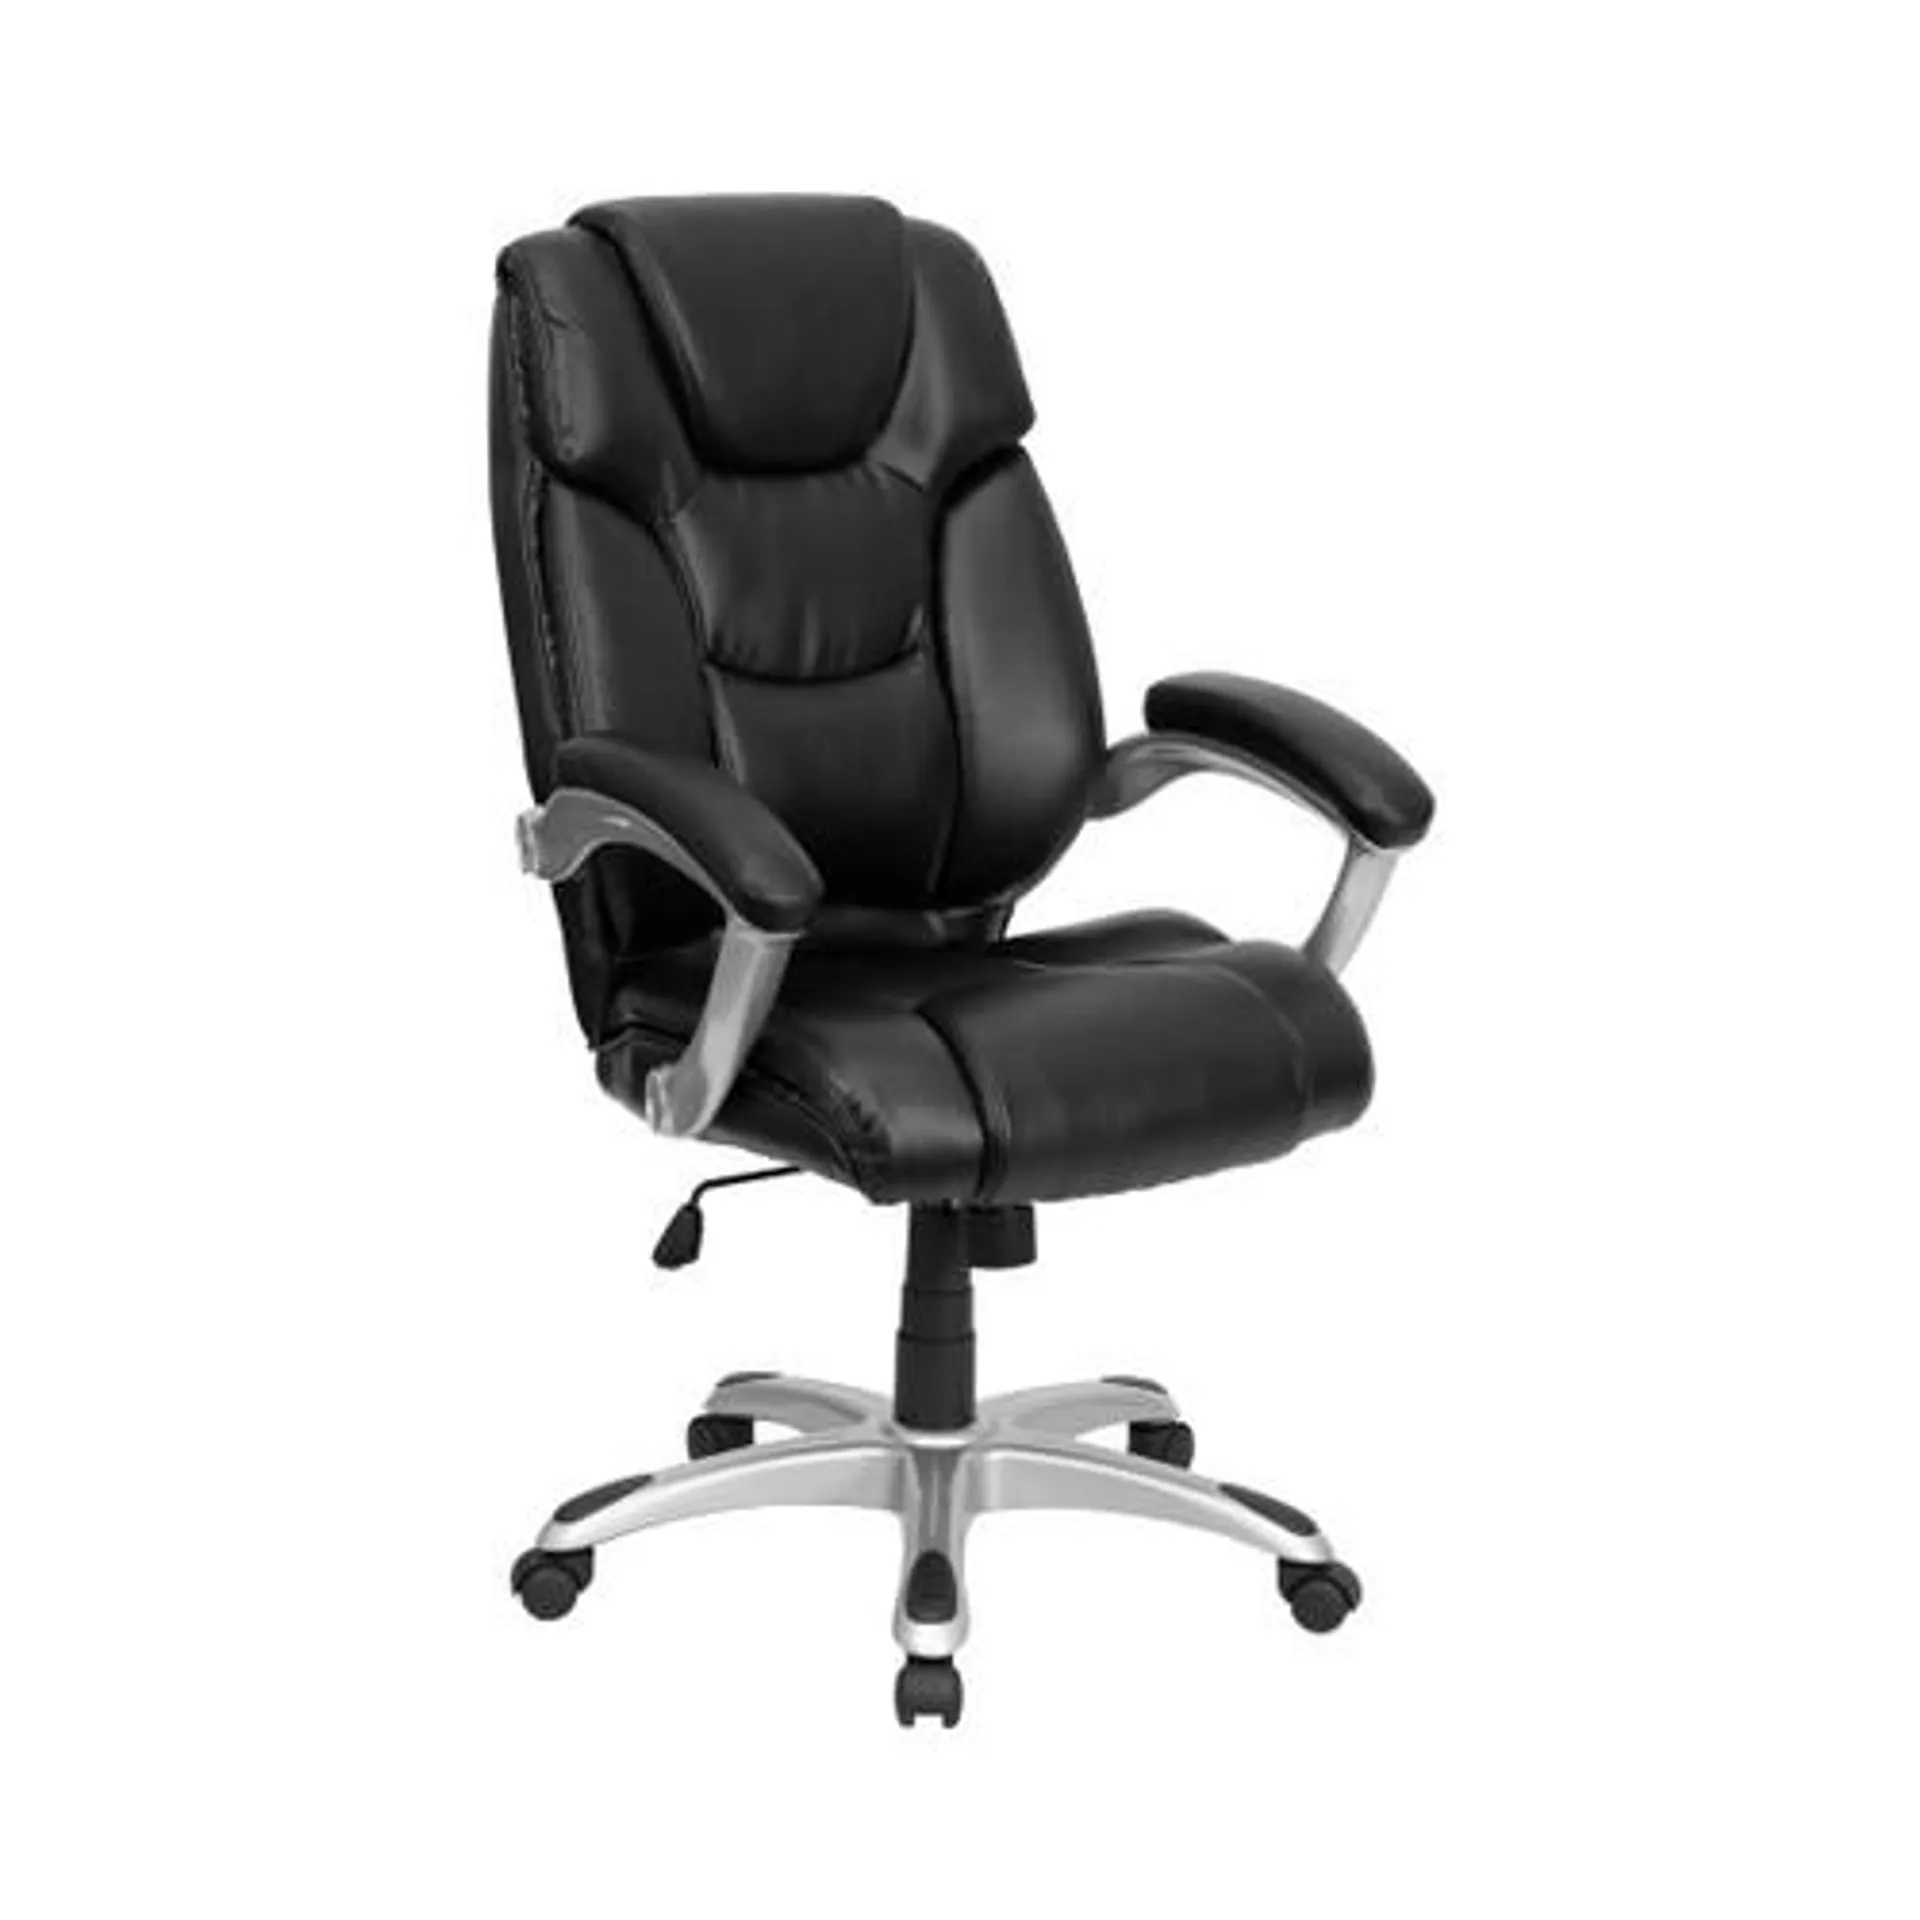 High Back Black LeatherSoft Layered Upholstered Executive Swivel Ergonomic Office Chair with Silver Nylon Base and Arms - GO931HBKGG